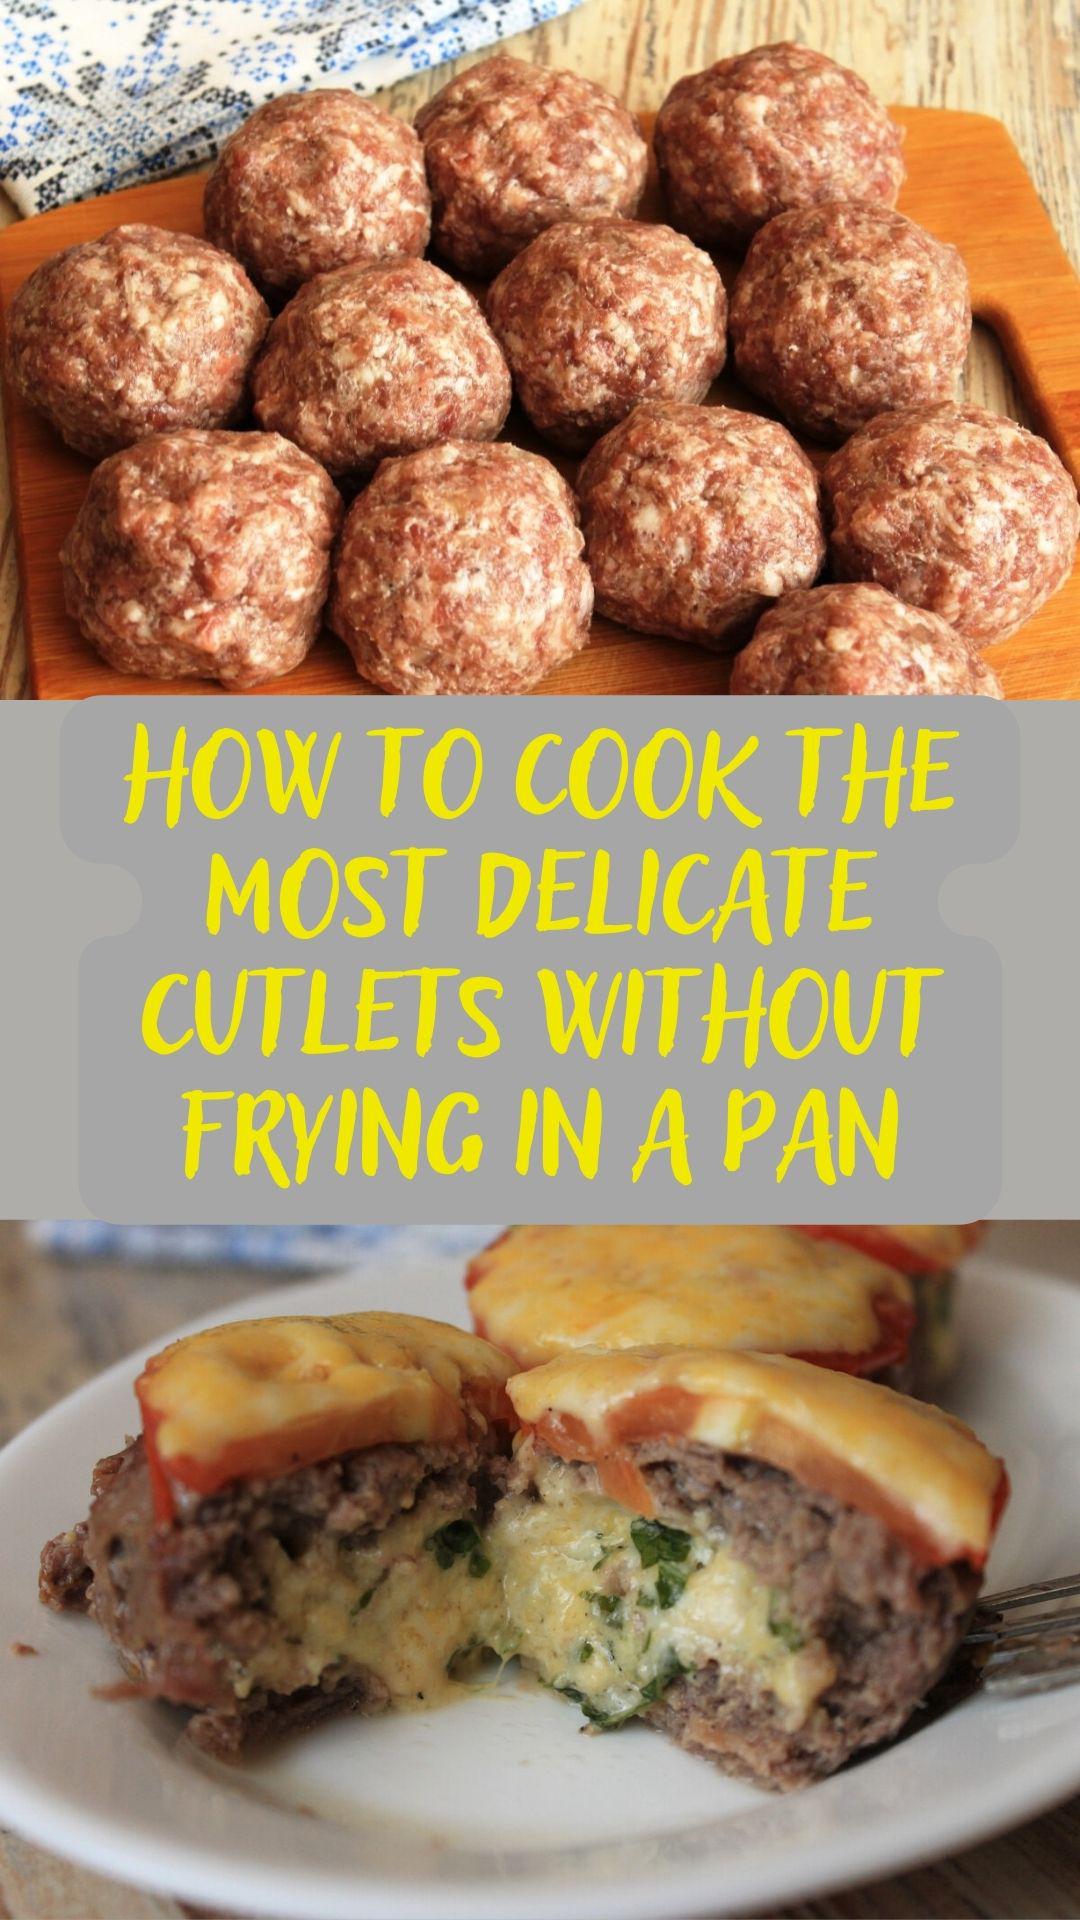 How to cook the most delicate cutlets without frying in a pan